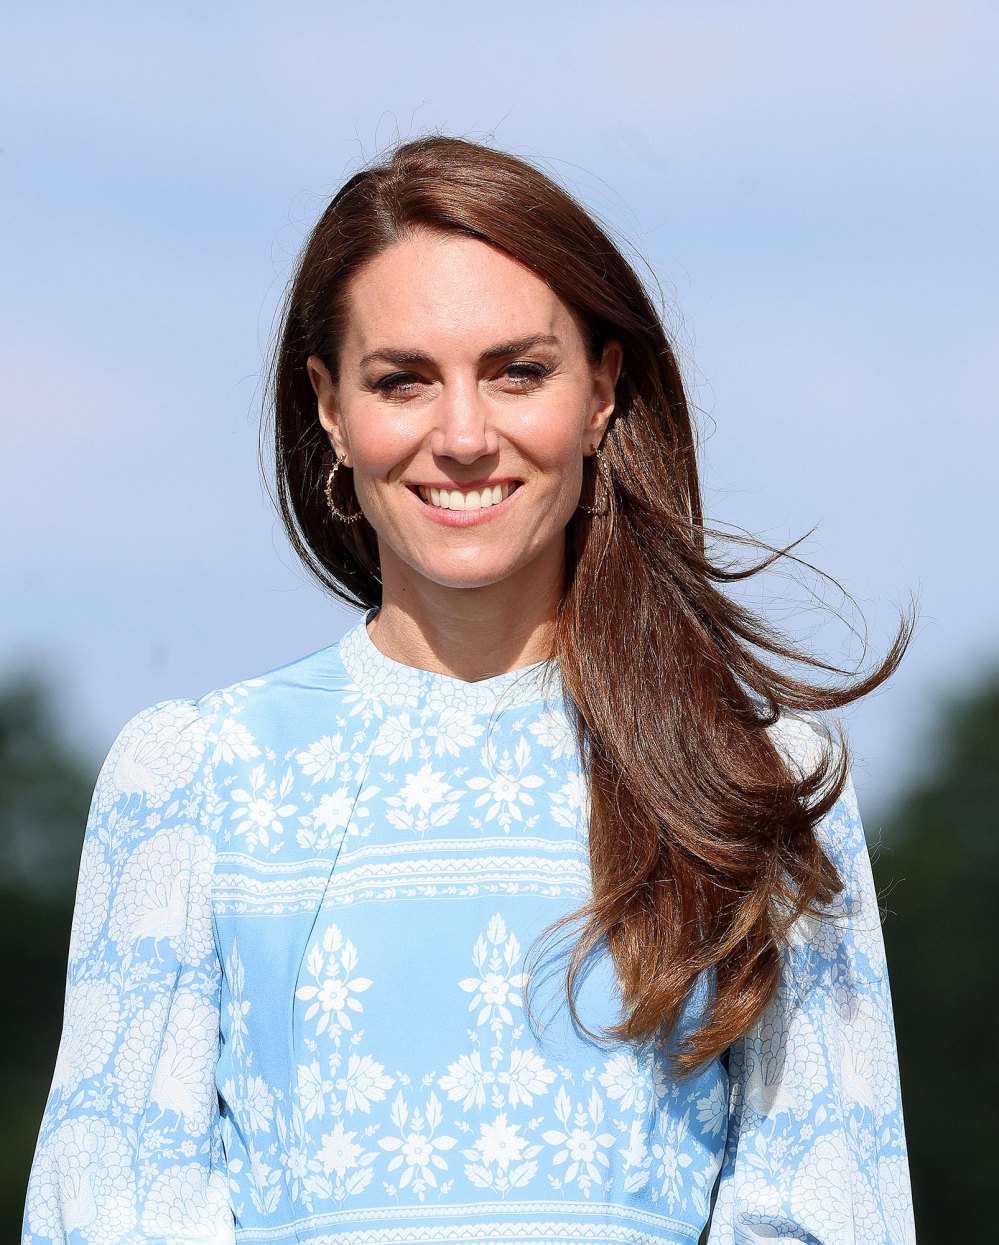 Every Time Prince William Has Been Asked How Kate Middleton Is Coping During Her Cancer Battle